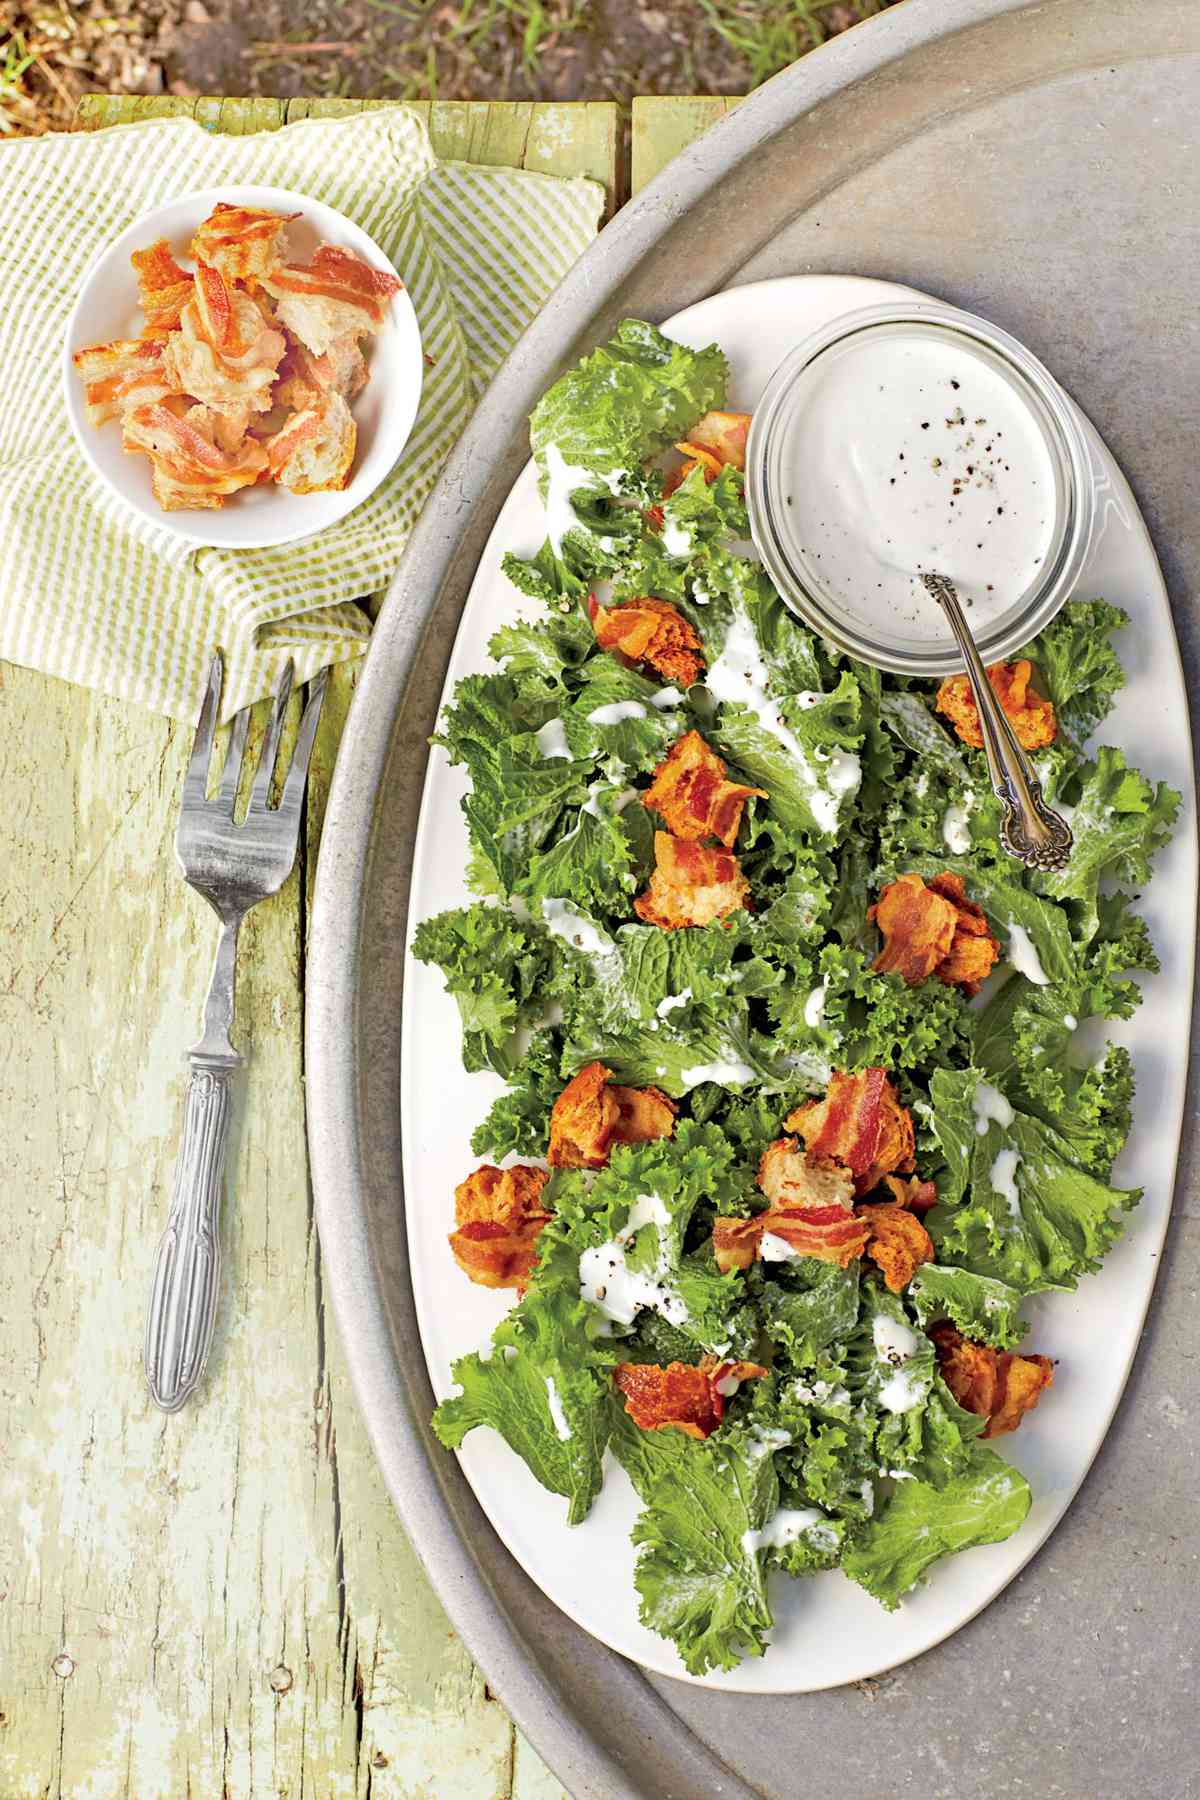 Mustard Greens with Yogurt-Parmesan Dressing and Bacon Croutons